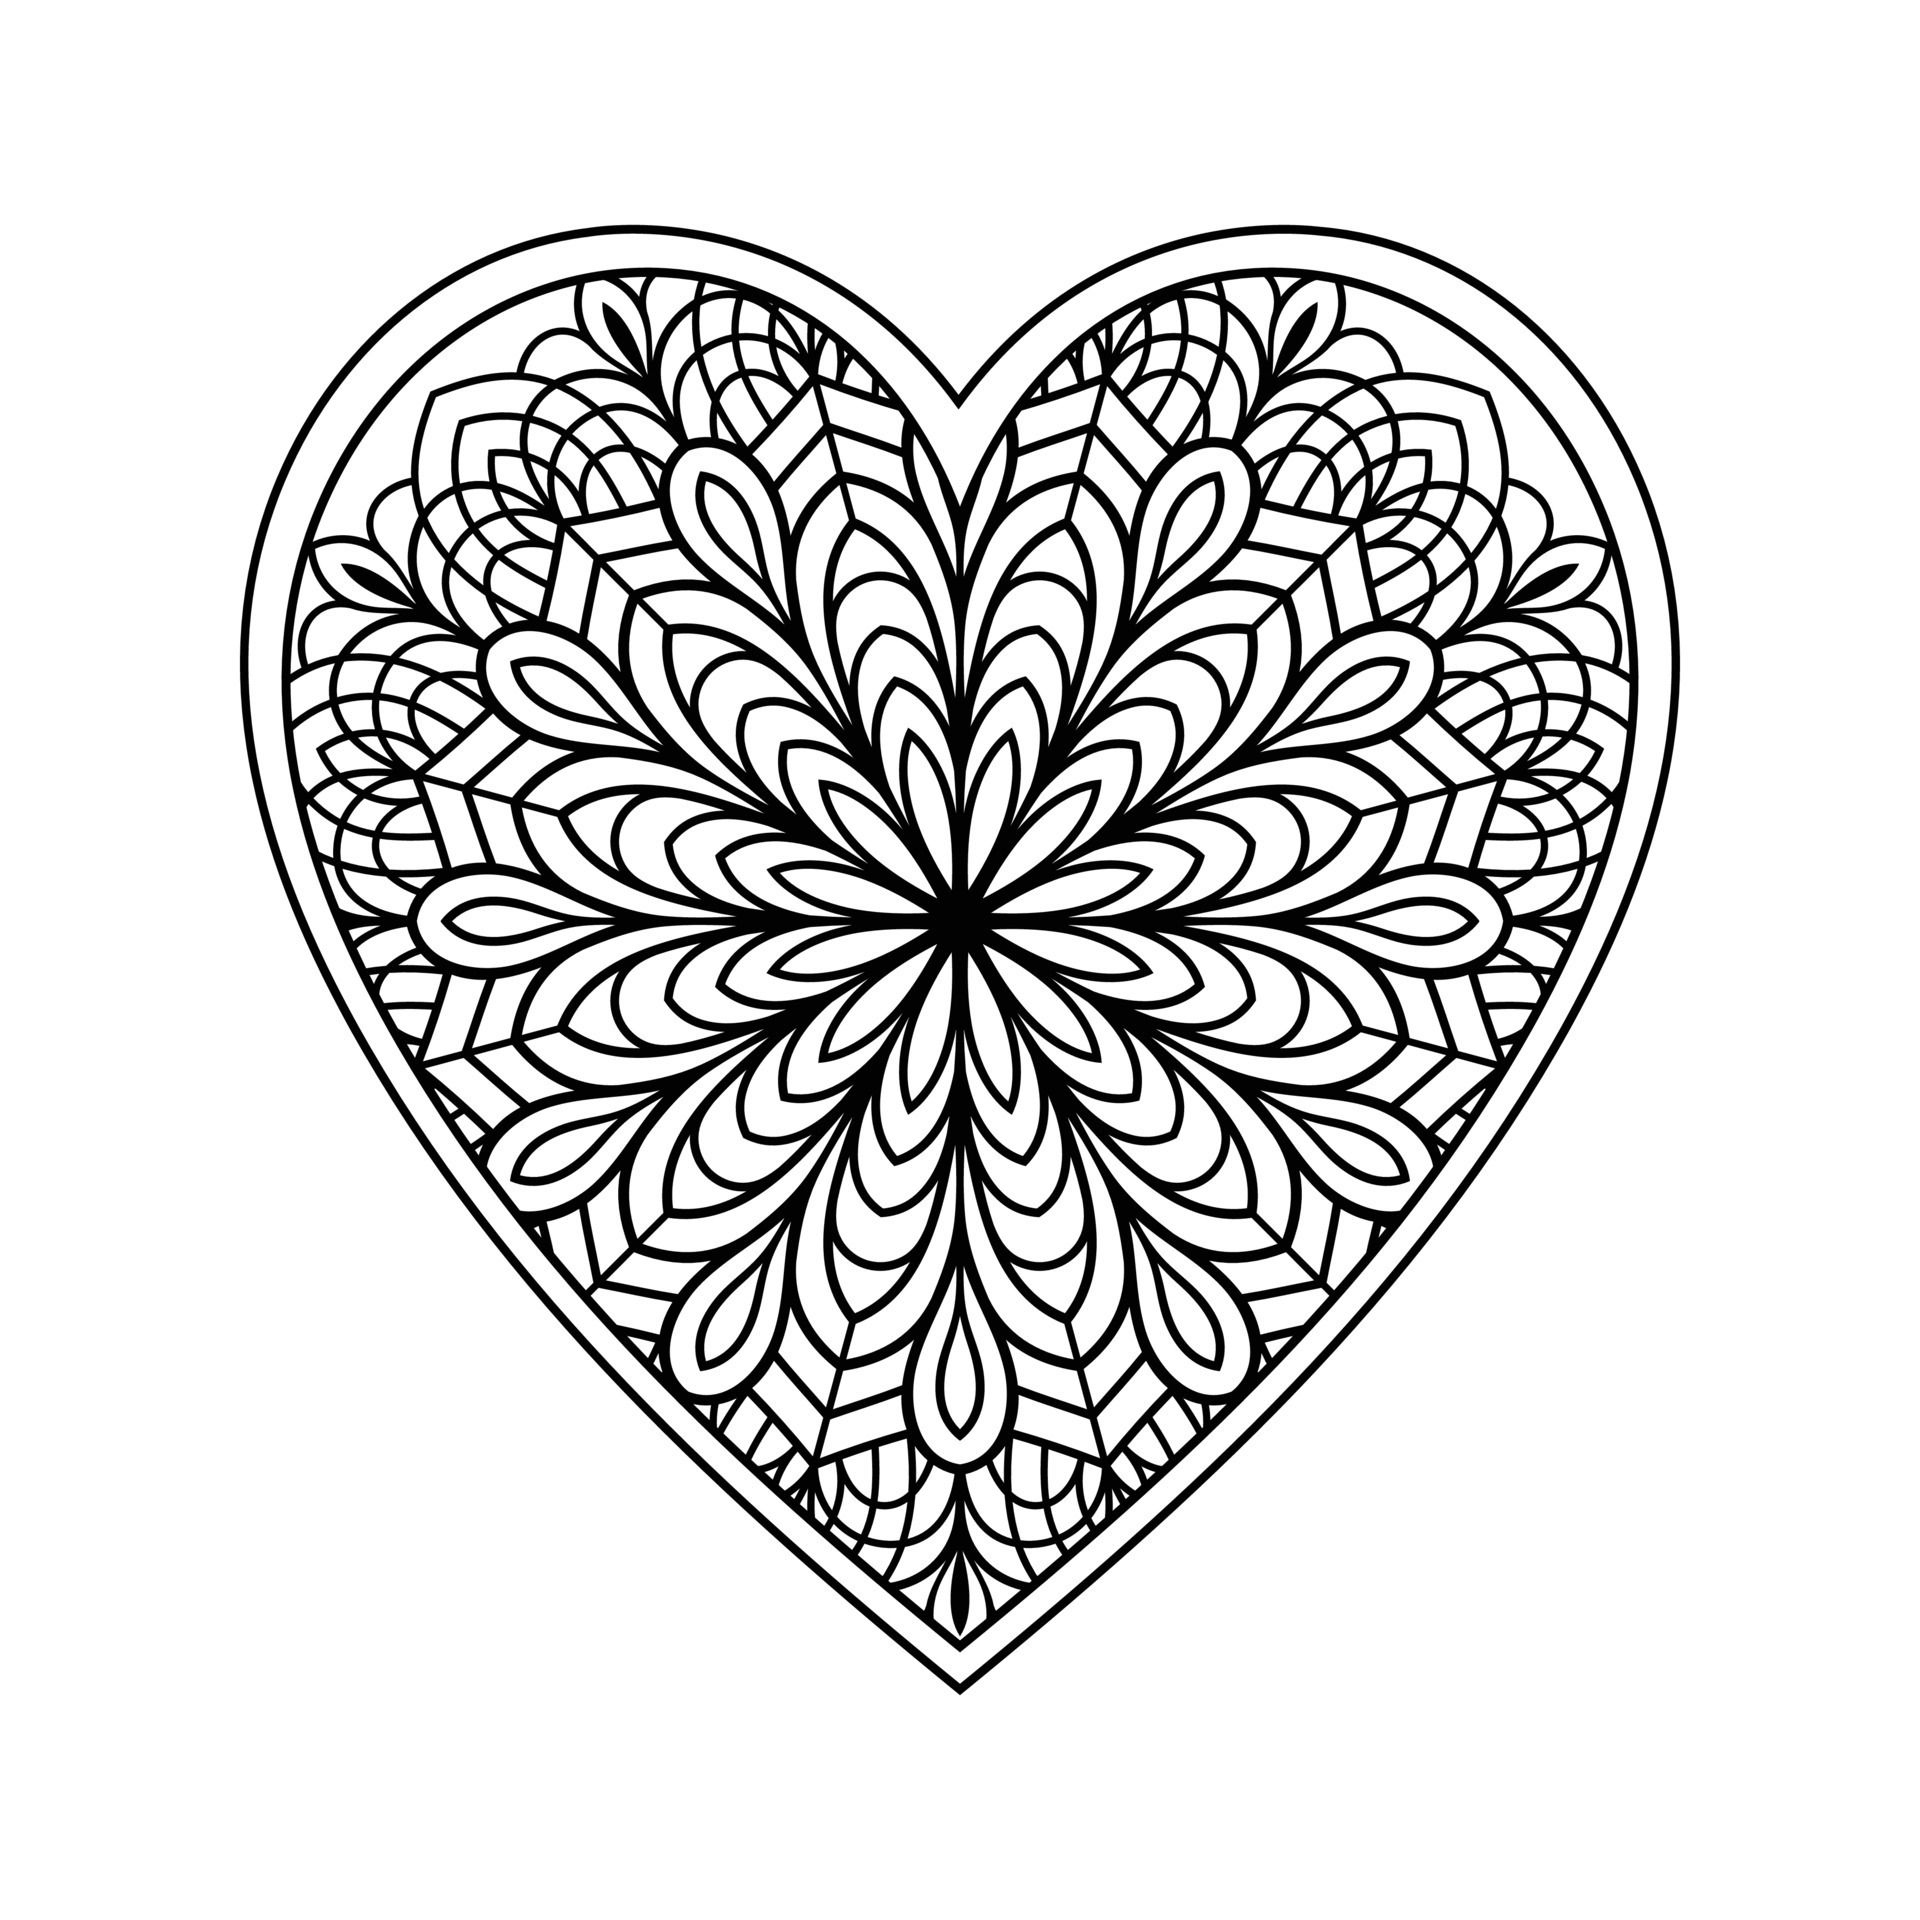 heart-mandala-coloring-page-for-adult-heart-with-floral-mandala